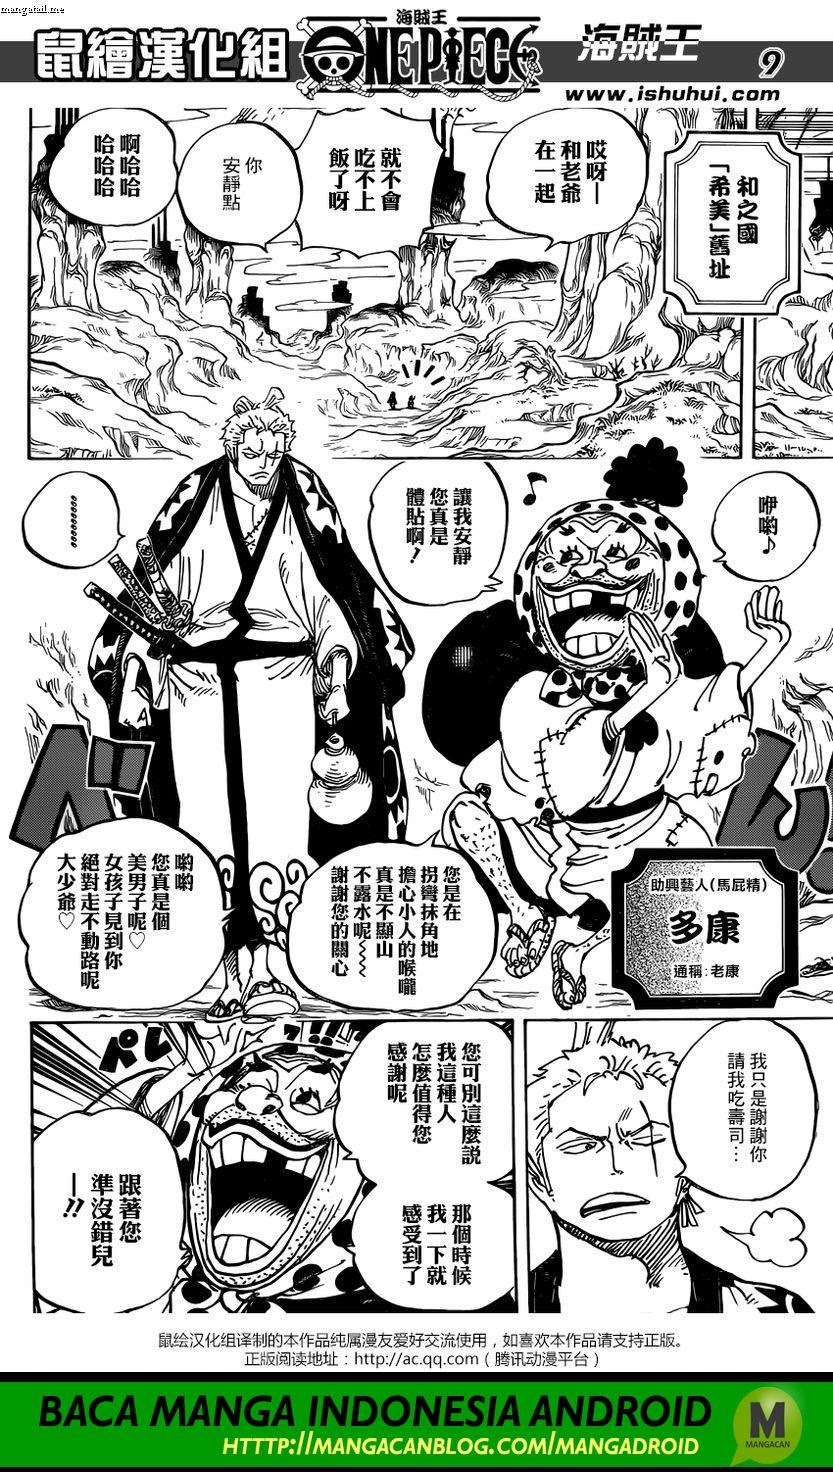 One Piece Chapter 928 – Raw - 107